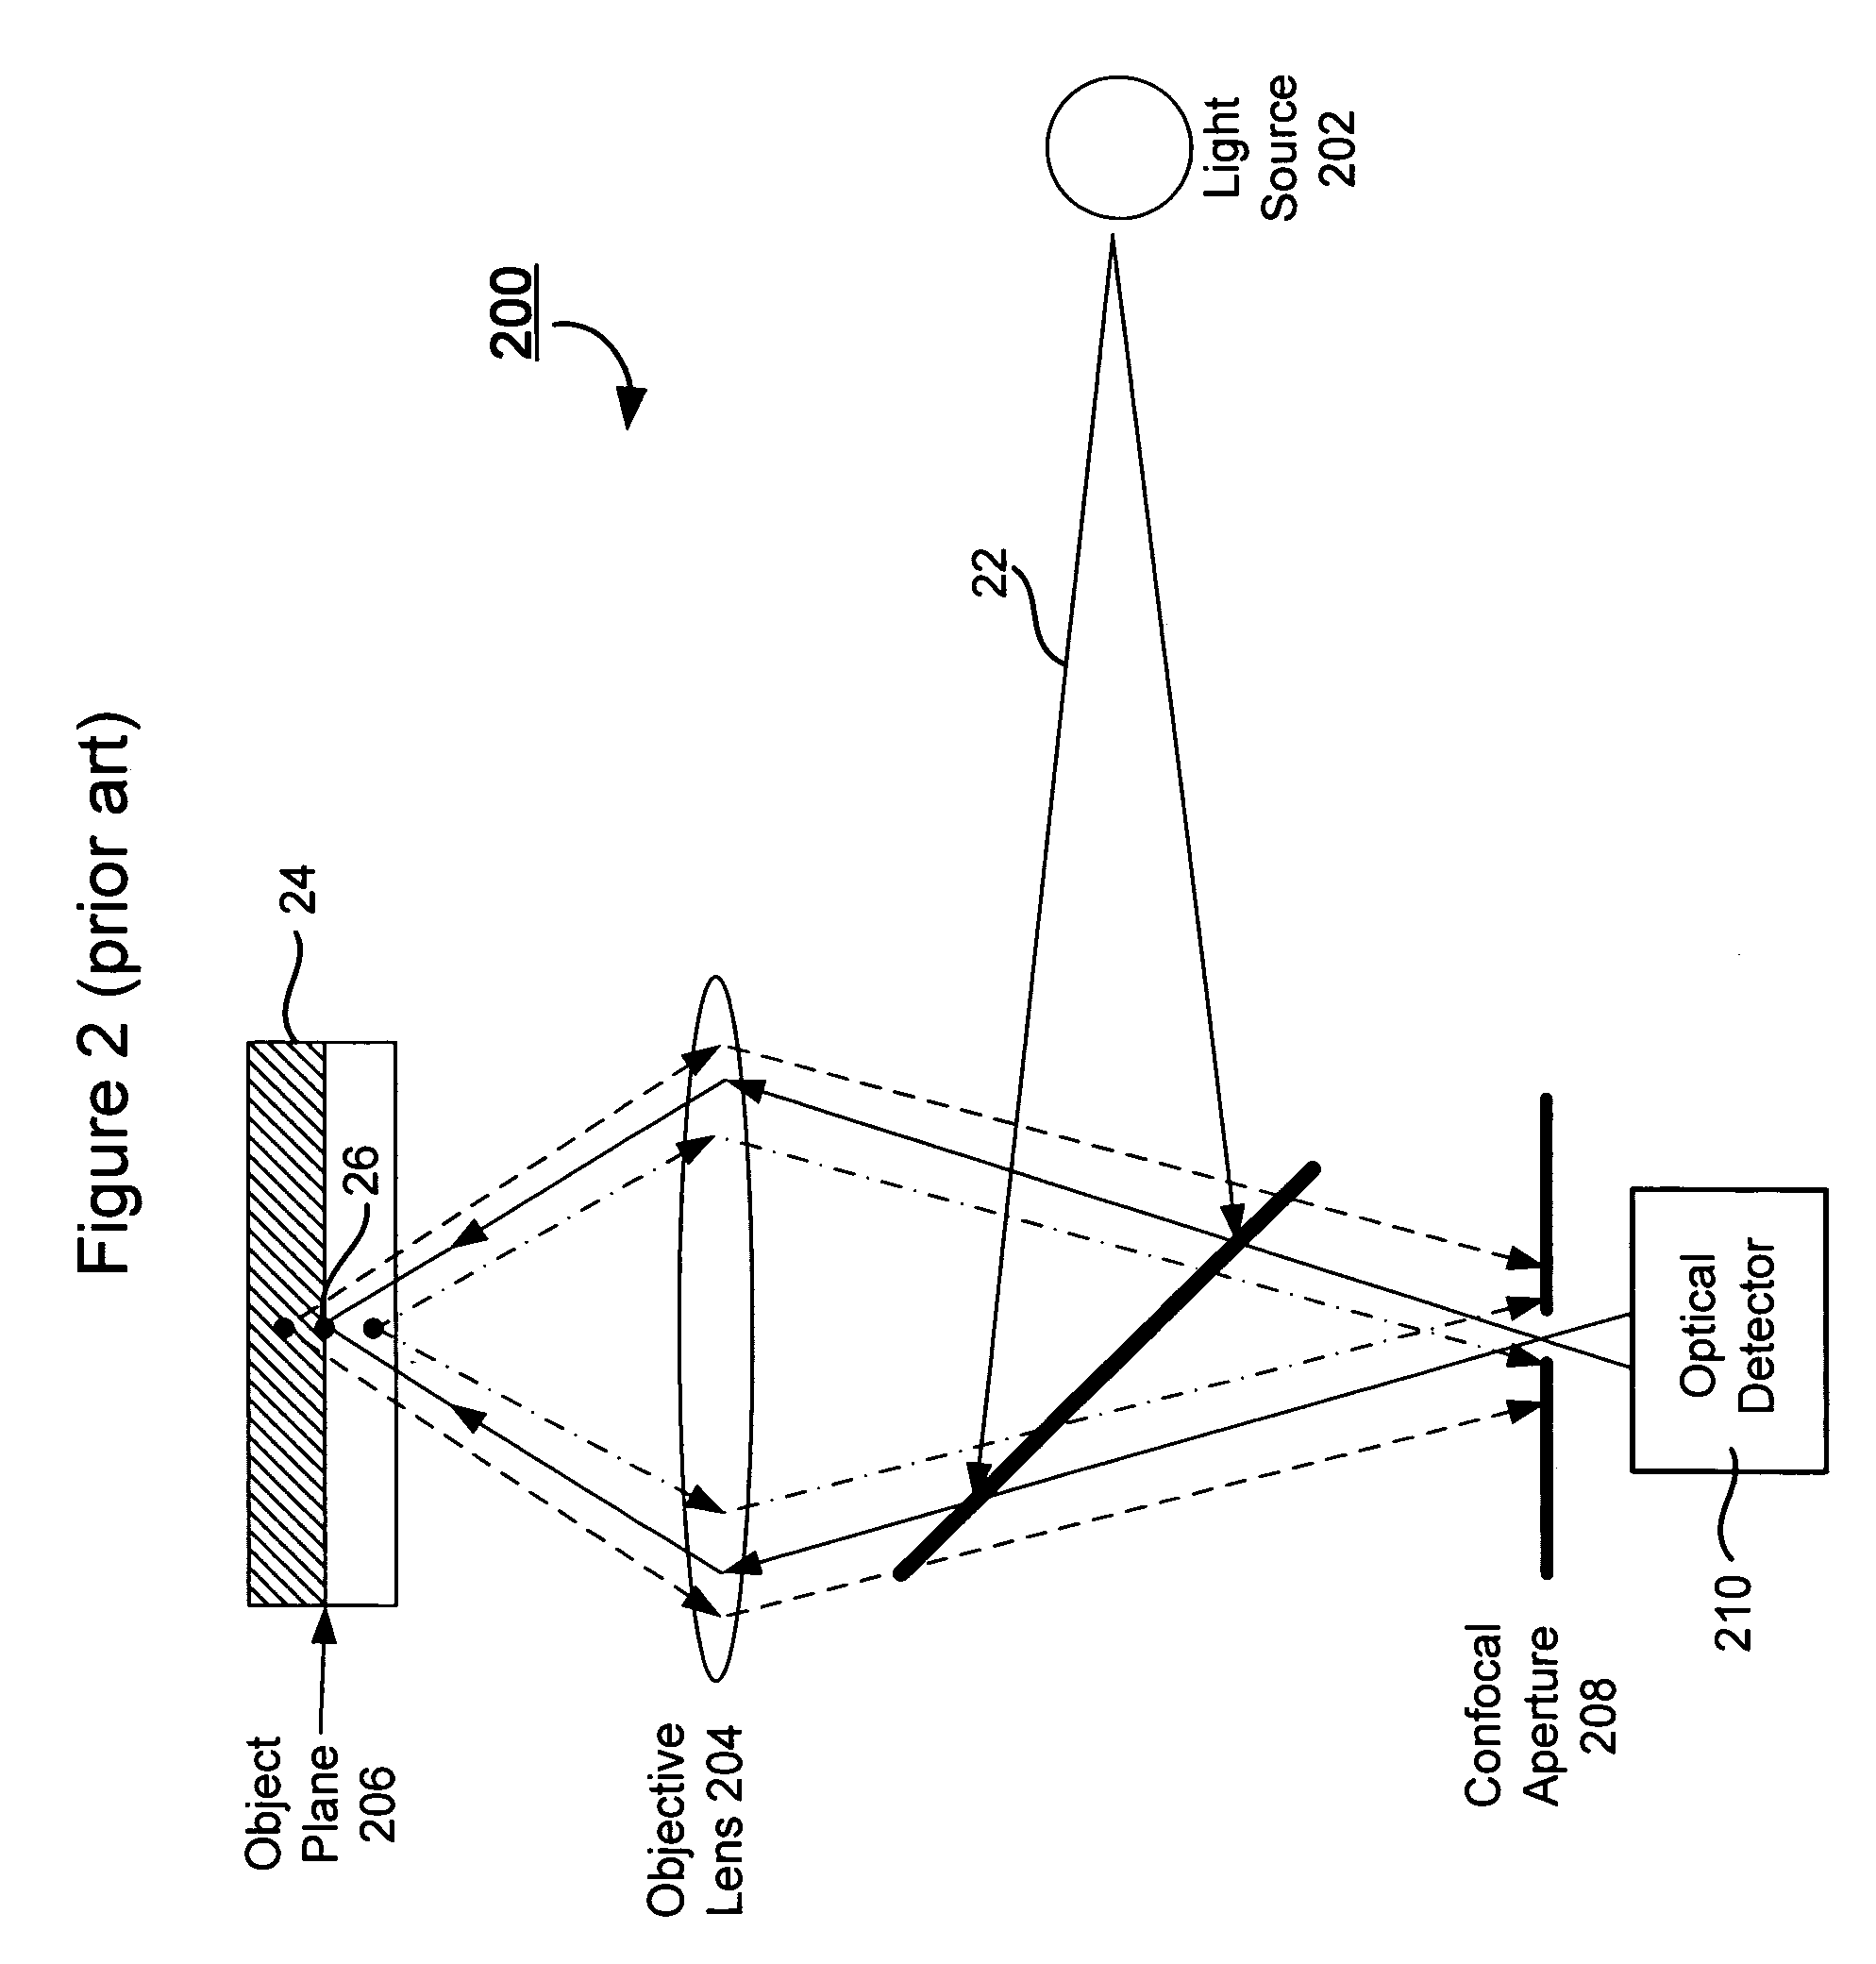 System and method for utilizing an autofocus feature in an automated microscope